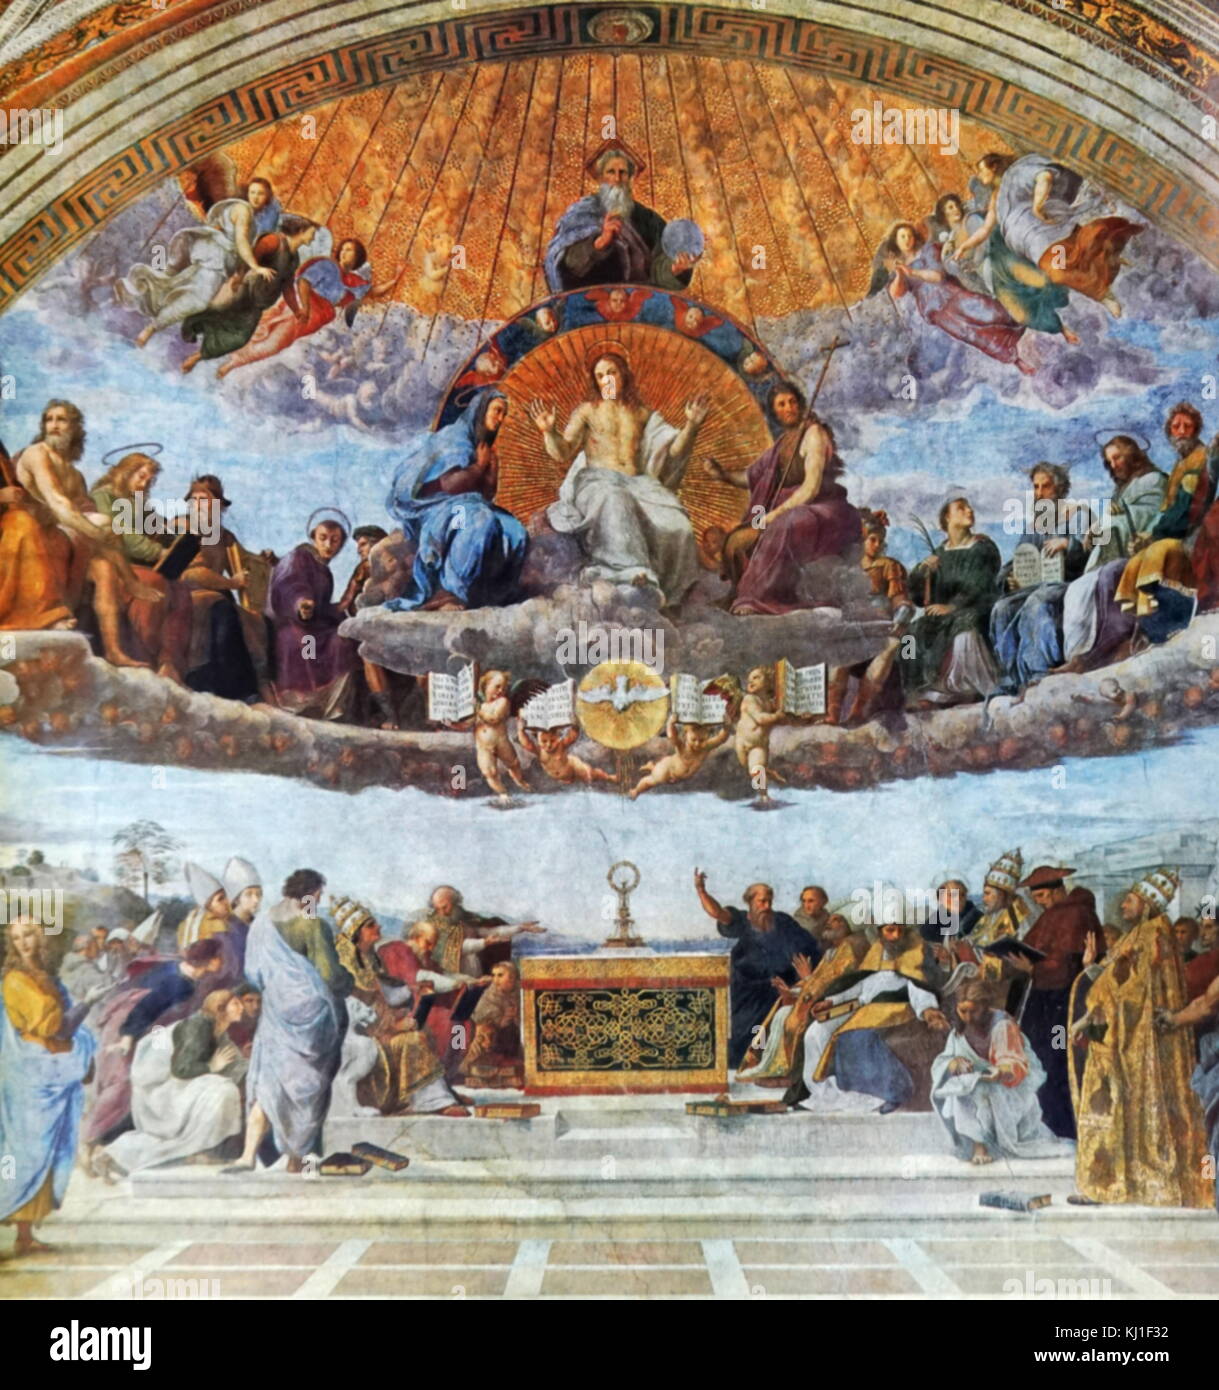 The Disputation of the Sacrament (La disputa del sacramento), or Disputa; painting by the Italian Renaissance artist; Raphael. It was painted between 1509 and 1510, to decorate with frescoes the rooms that are now known as the Stanze di Raffaello, in the Apostolic Palace in the Vatican. In the painting, Raphael has created a scene spanning both heaven and earth. Above, Christ is surrounded by a halo, with the Blessed Virgin Mary, John the Baptist at his right and left. Other various biblical figures such as Adam, Jacob and Moses are to the sides. God the Father sits above Jesus, depicted reign Stock Photo